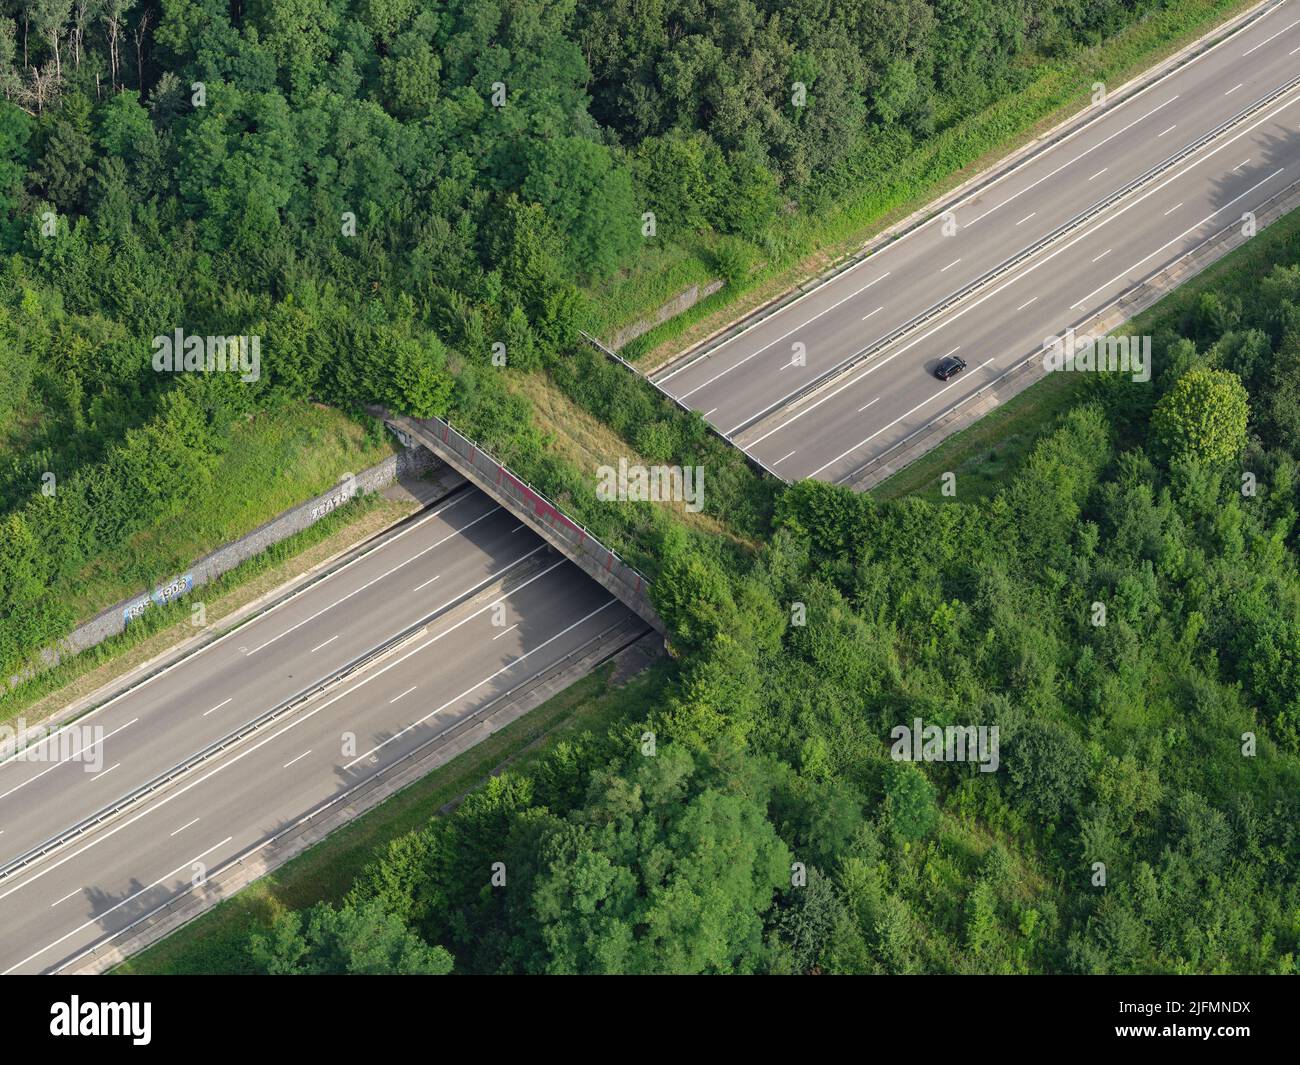 AERIAL VIEW. Wildlife crossing above a highway. Epfig, Bas-Rhin, Alsace, Grand Est, France. Stock Photo